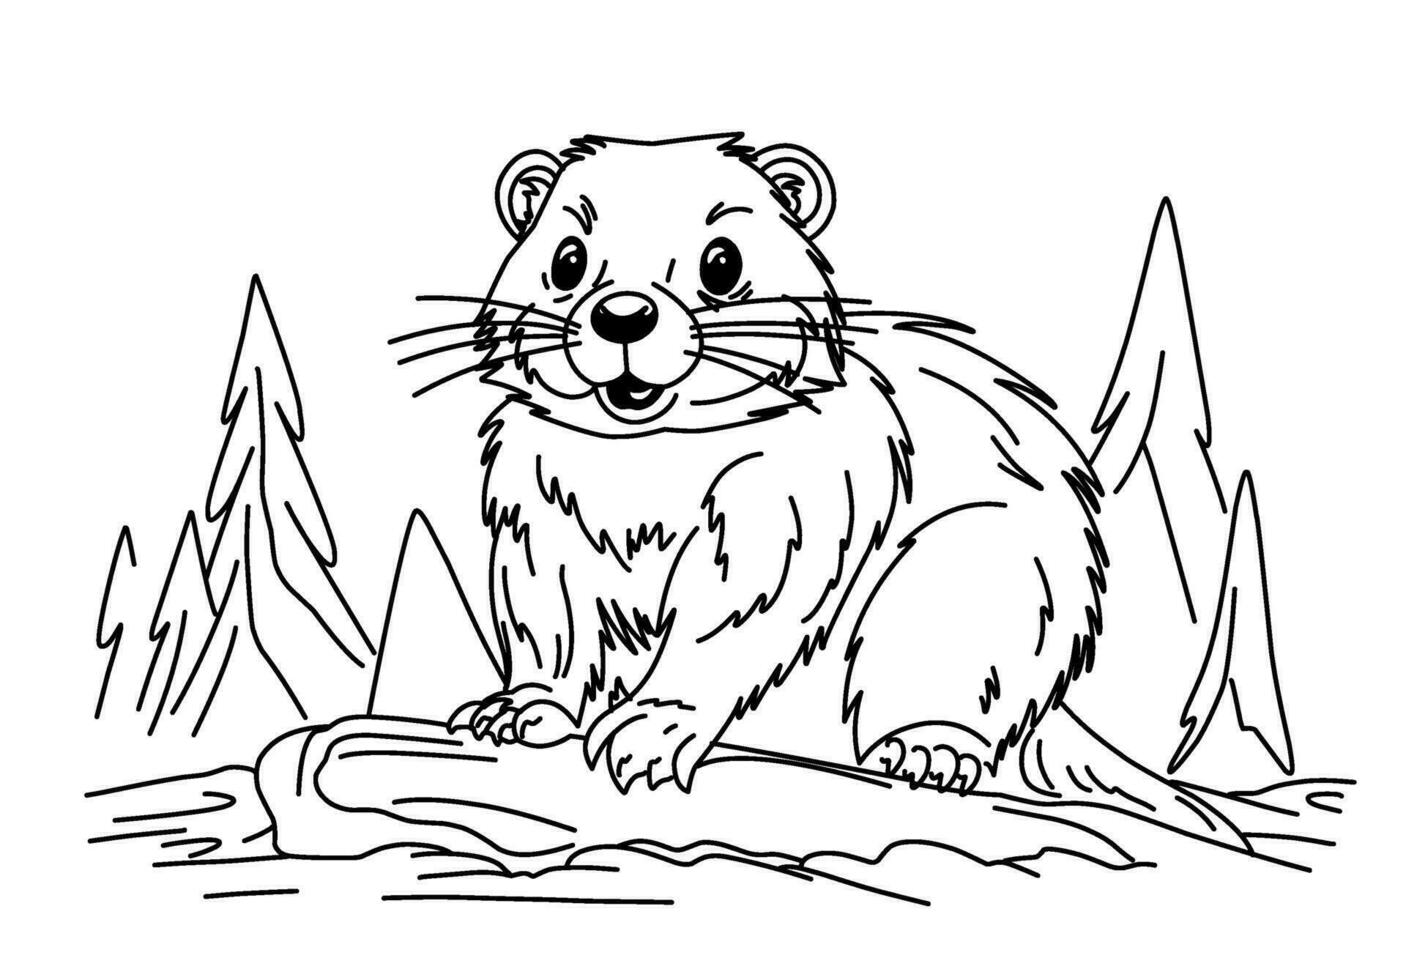 Groundhog Day February 2nd. Cute baby animal beaver.Groundhog day coloring book vector